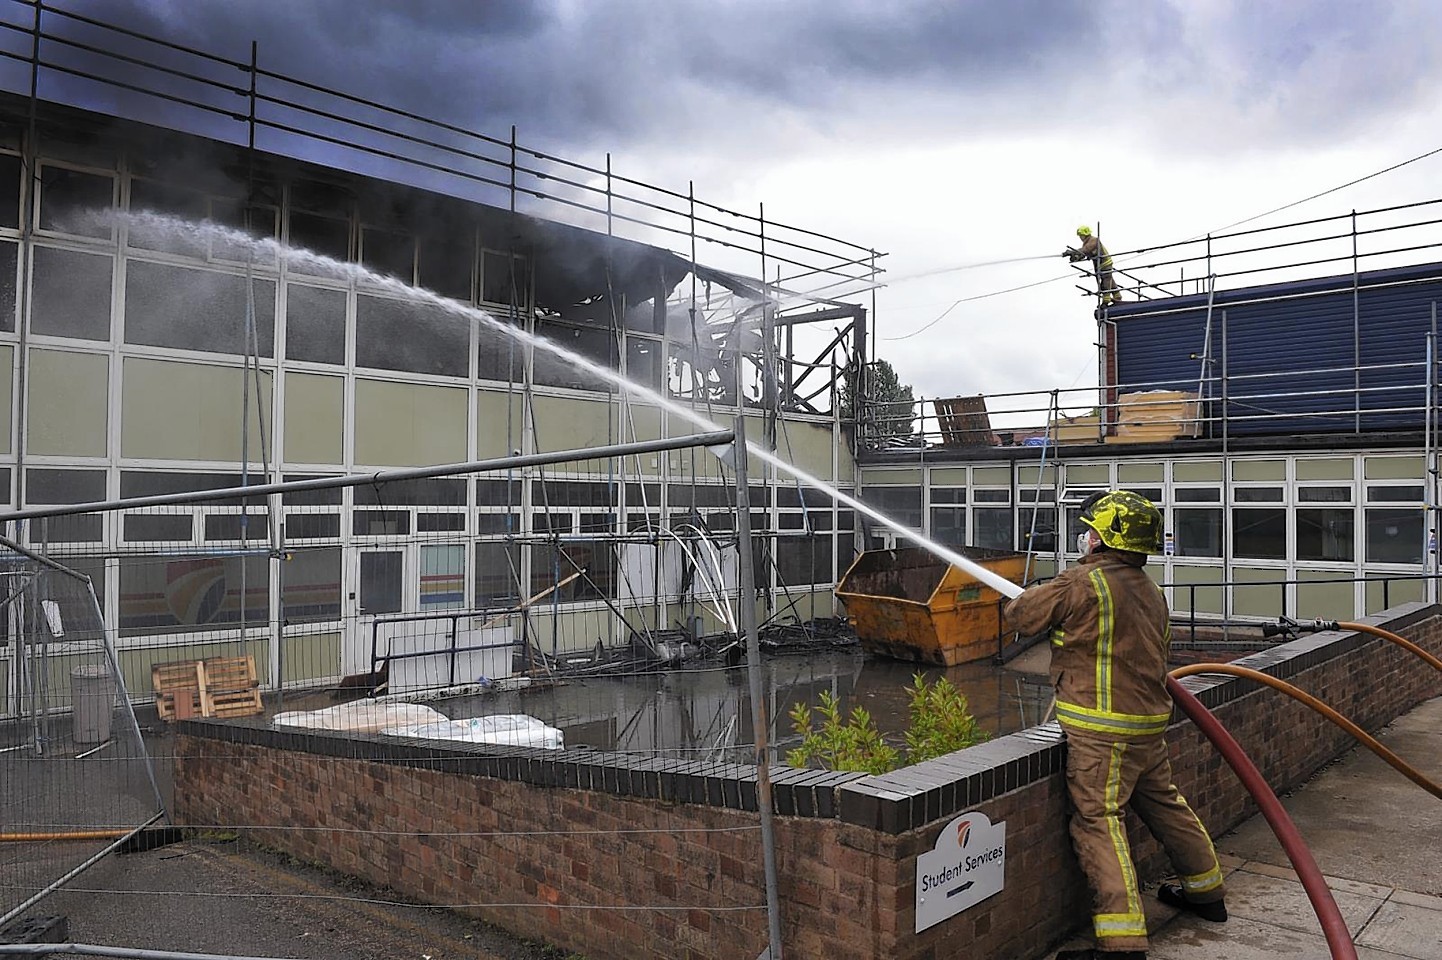 Firefighters tackle the fire at The Freeston Academy